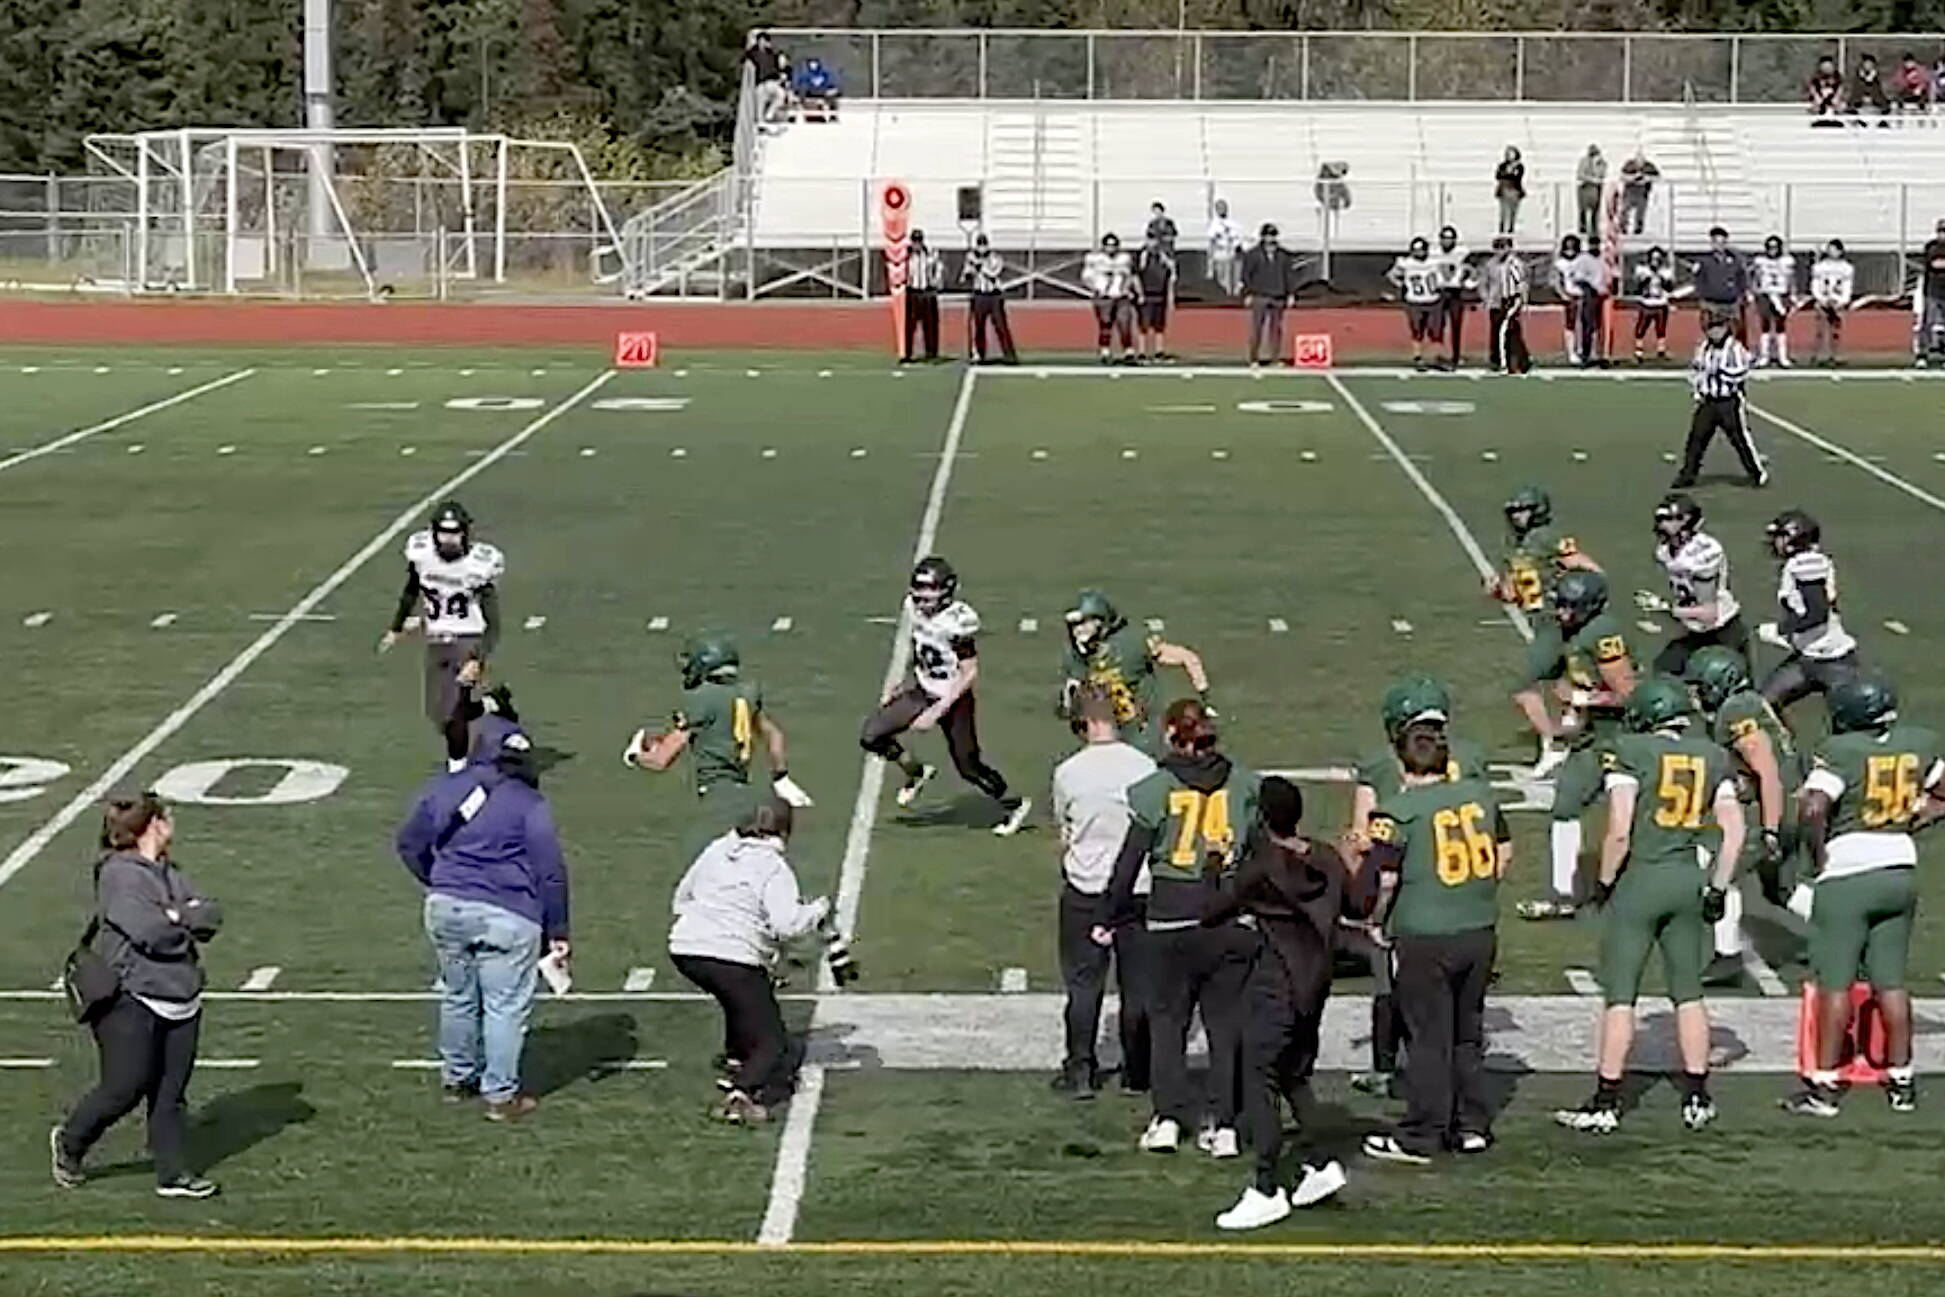 A Service High School player returns a punt deep into Juneau territory during the first quarter of Saturday’s game on the Anchorage school’s home field. Service scored its second touchdown a short time later to take a 15-0 lead before going on to win 54-14. (Courtesy of Juneau Huskies Football)